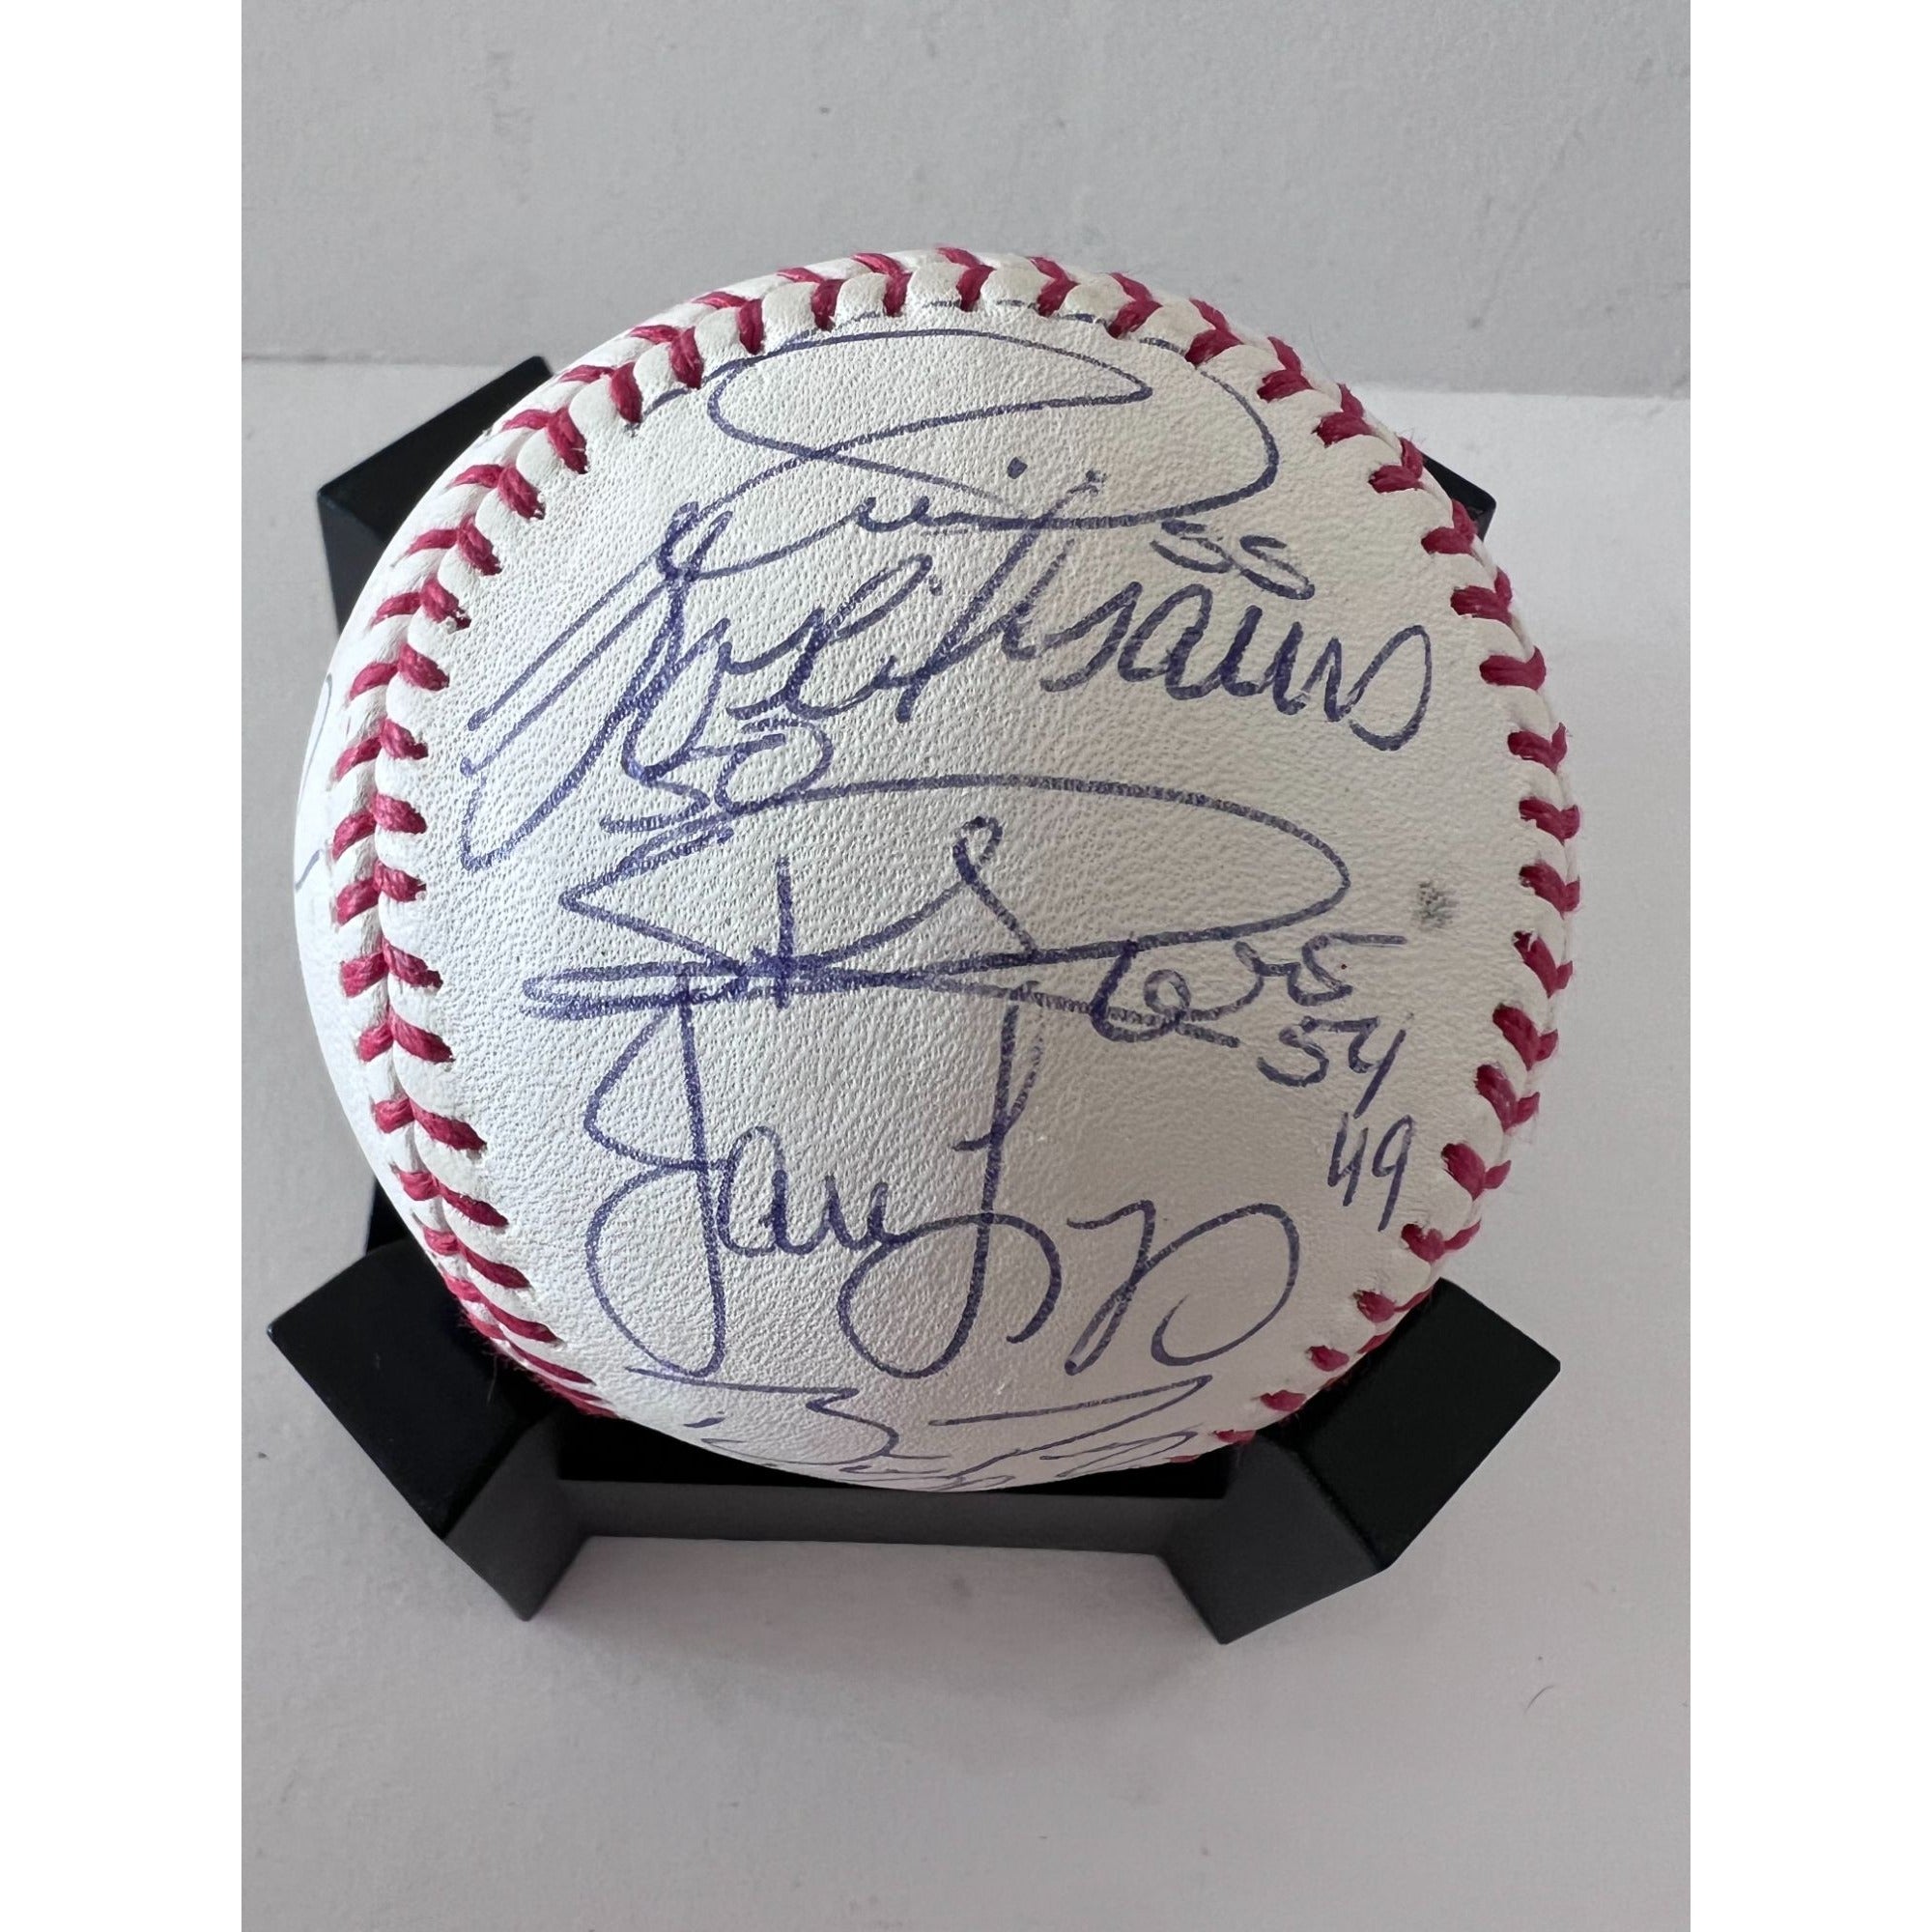 Buster Posey Bruce Bochy Tim Lincecum 2012 San Francisco Giants World Series champions team signed Rawlings commemorative baseball with proo